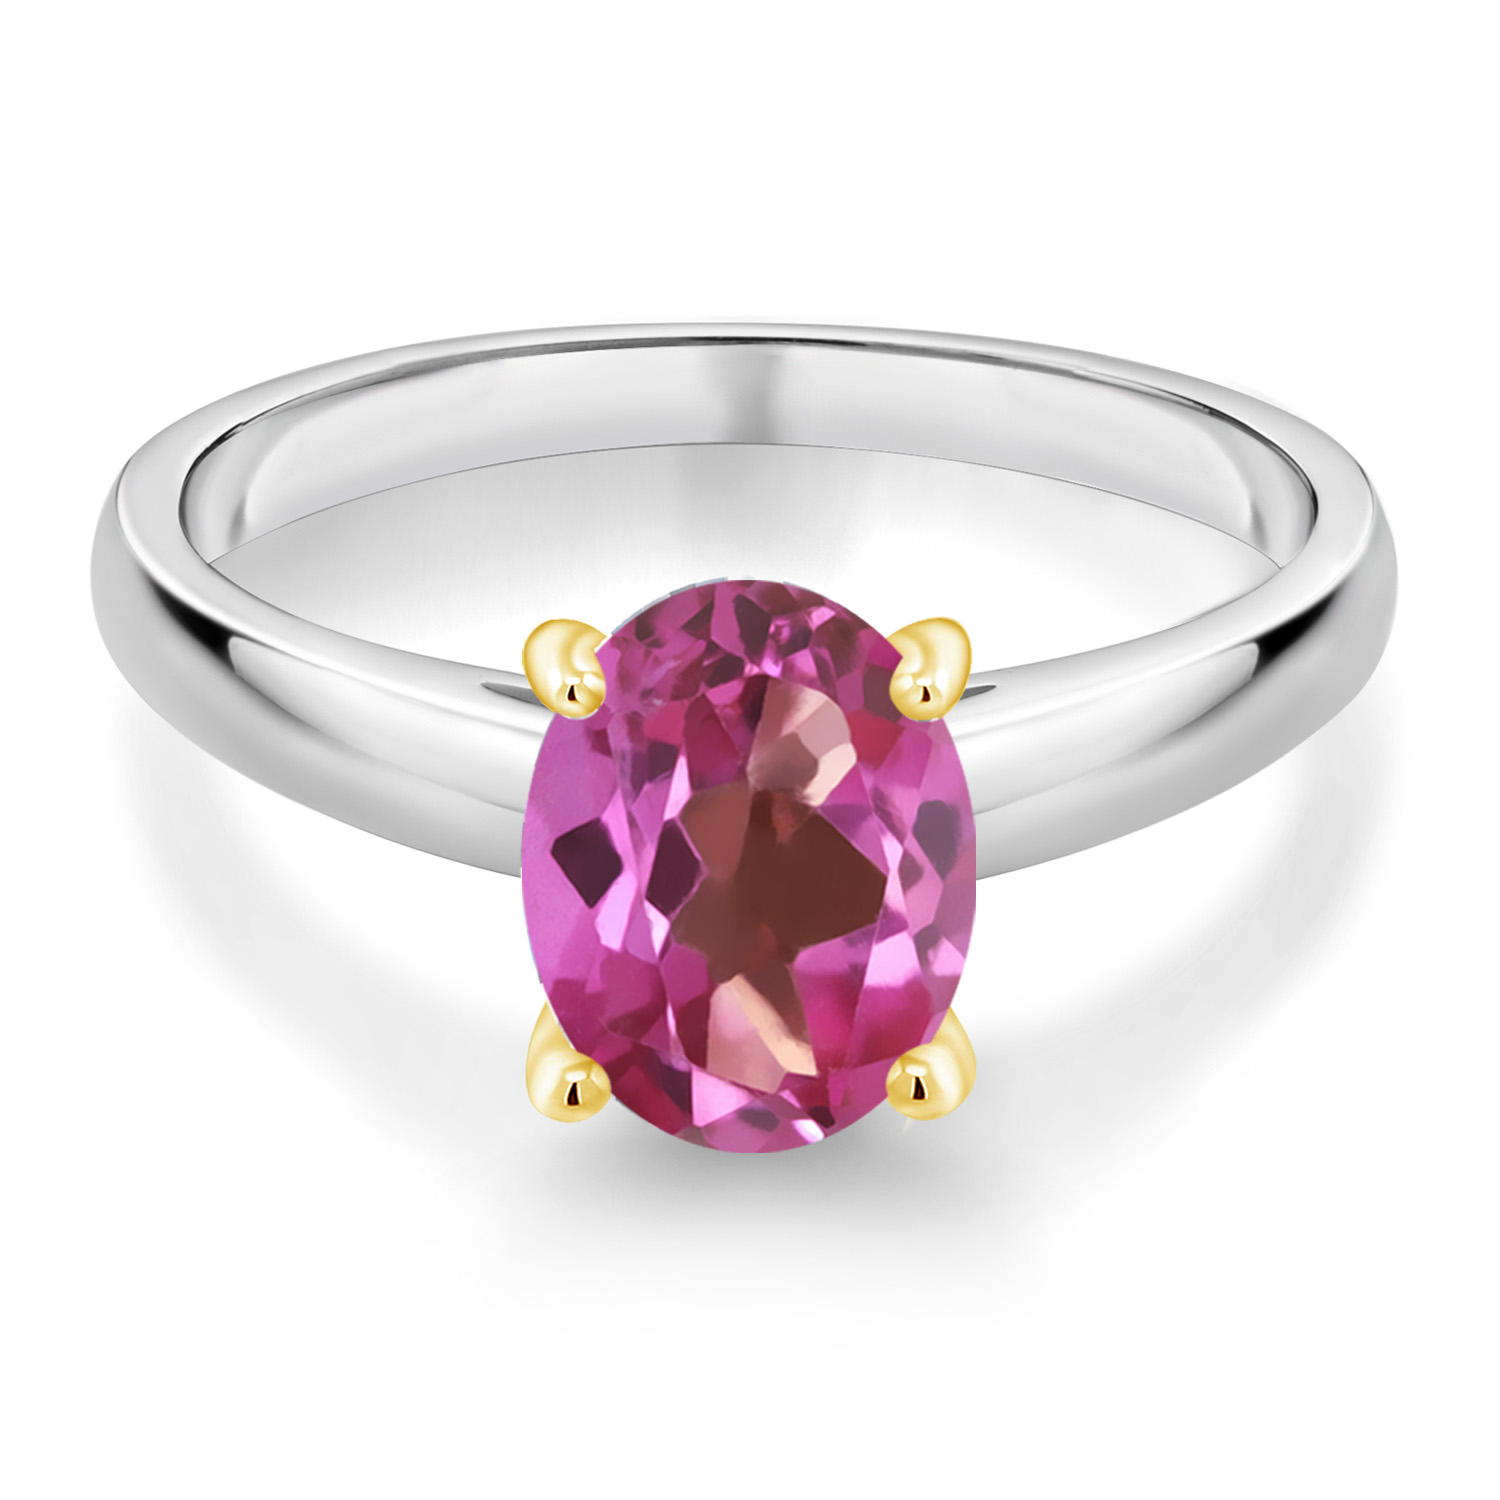 Gem Stone King 2.20 Ct Pink Mystic Topaz 925 Silver and 10K Yellow Gold Ring Ring